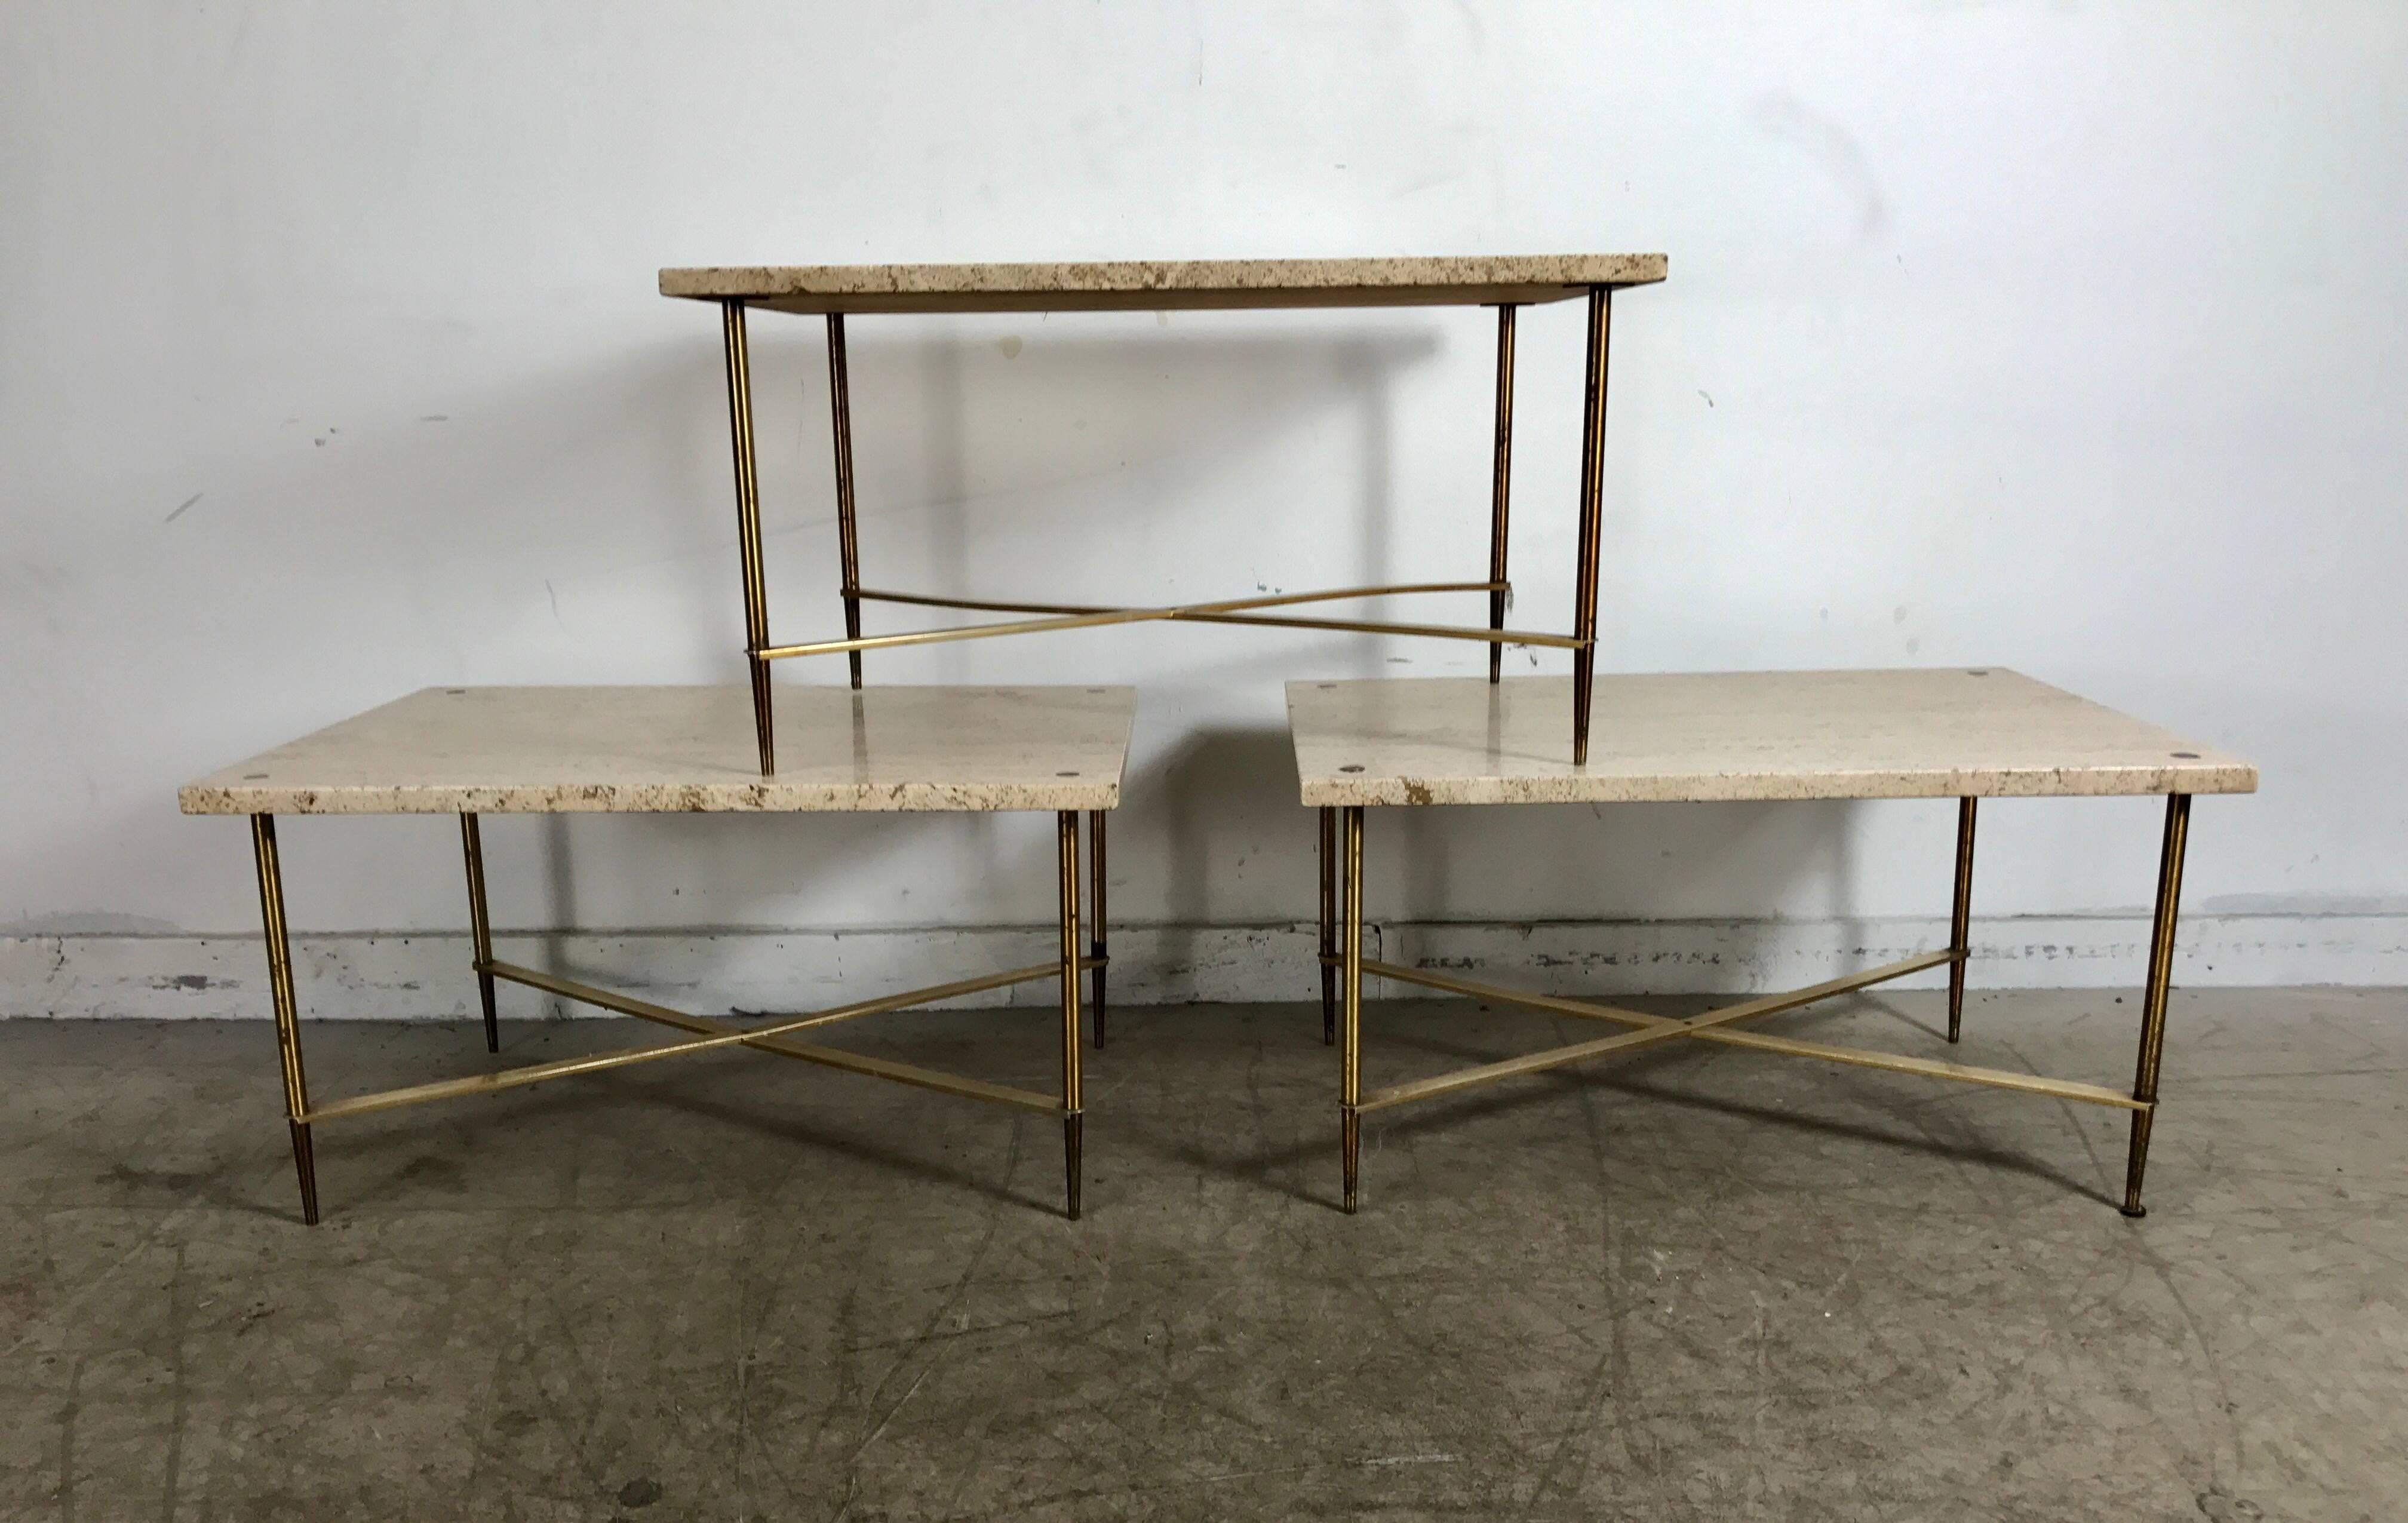 20th Century Stunning Travertine and Brass Tables made in Italy after Gio Ponti